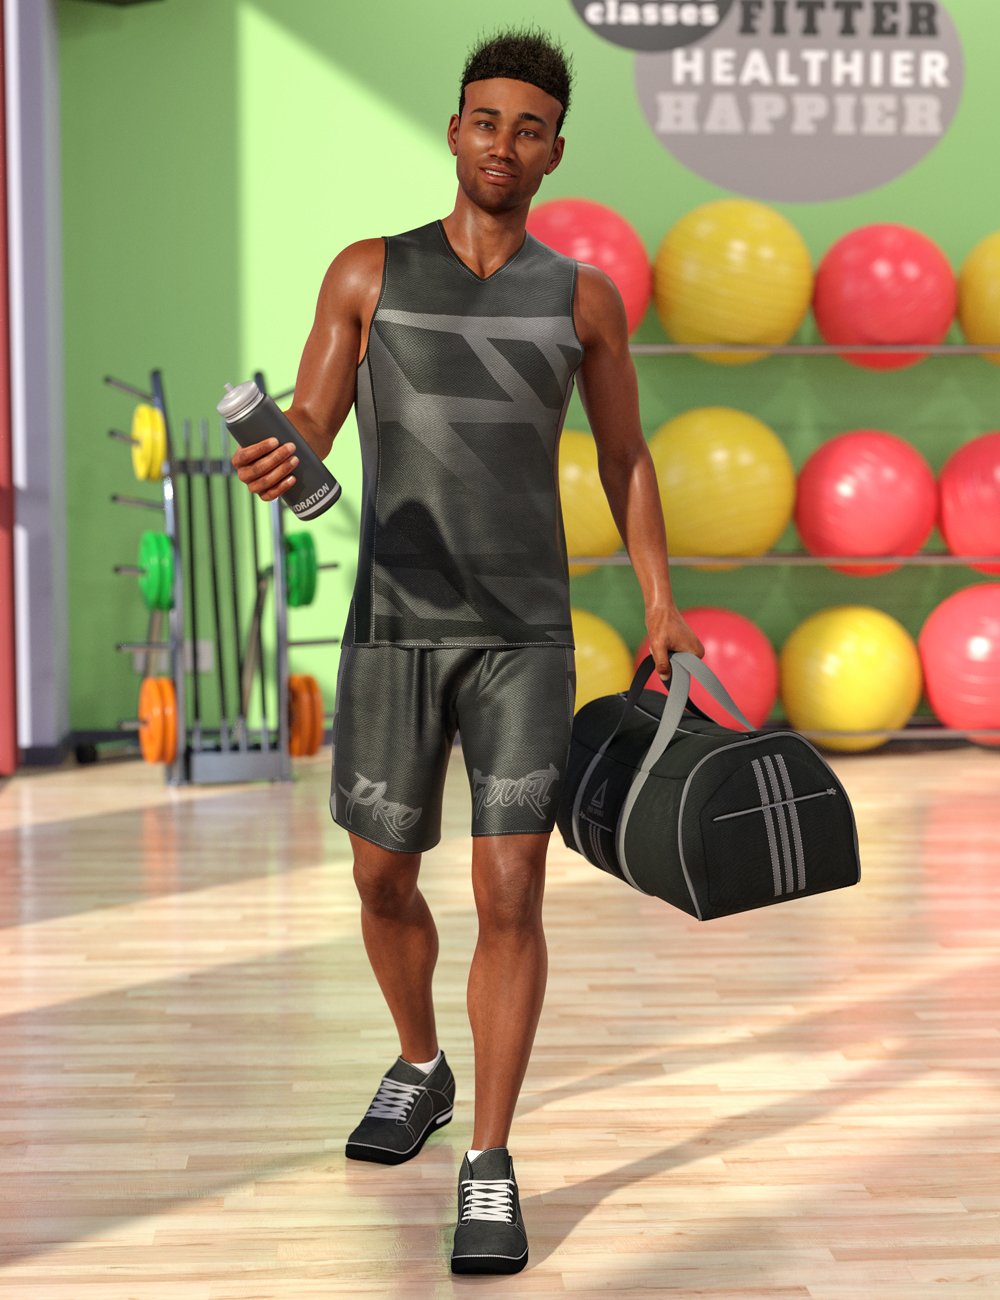 dForce Workout Outfit for Genesis 8 Male(s) by: DirtyFairyNikisatez, 3D Models by Daz 3D